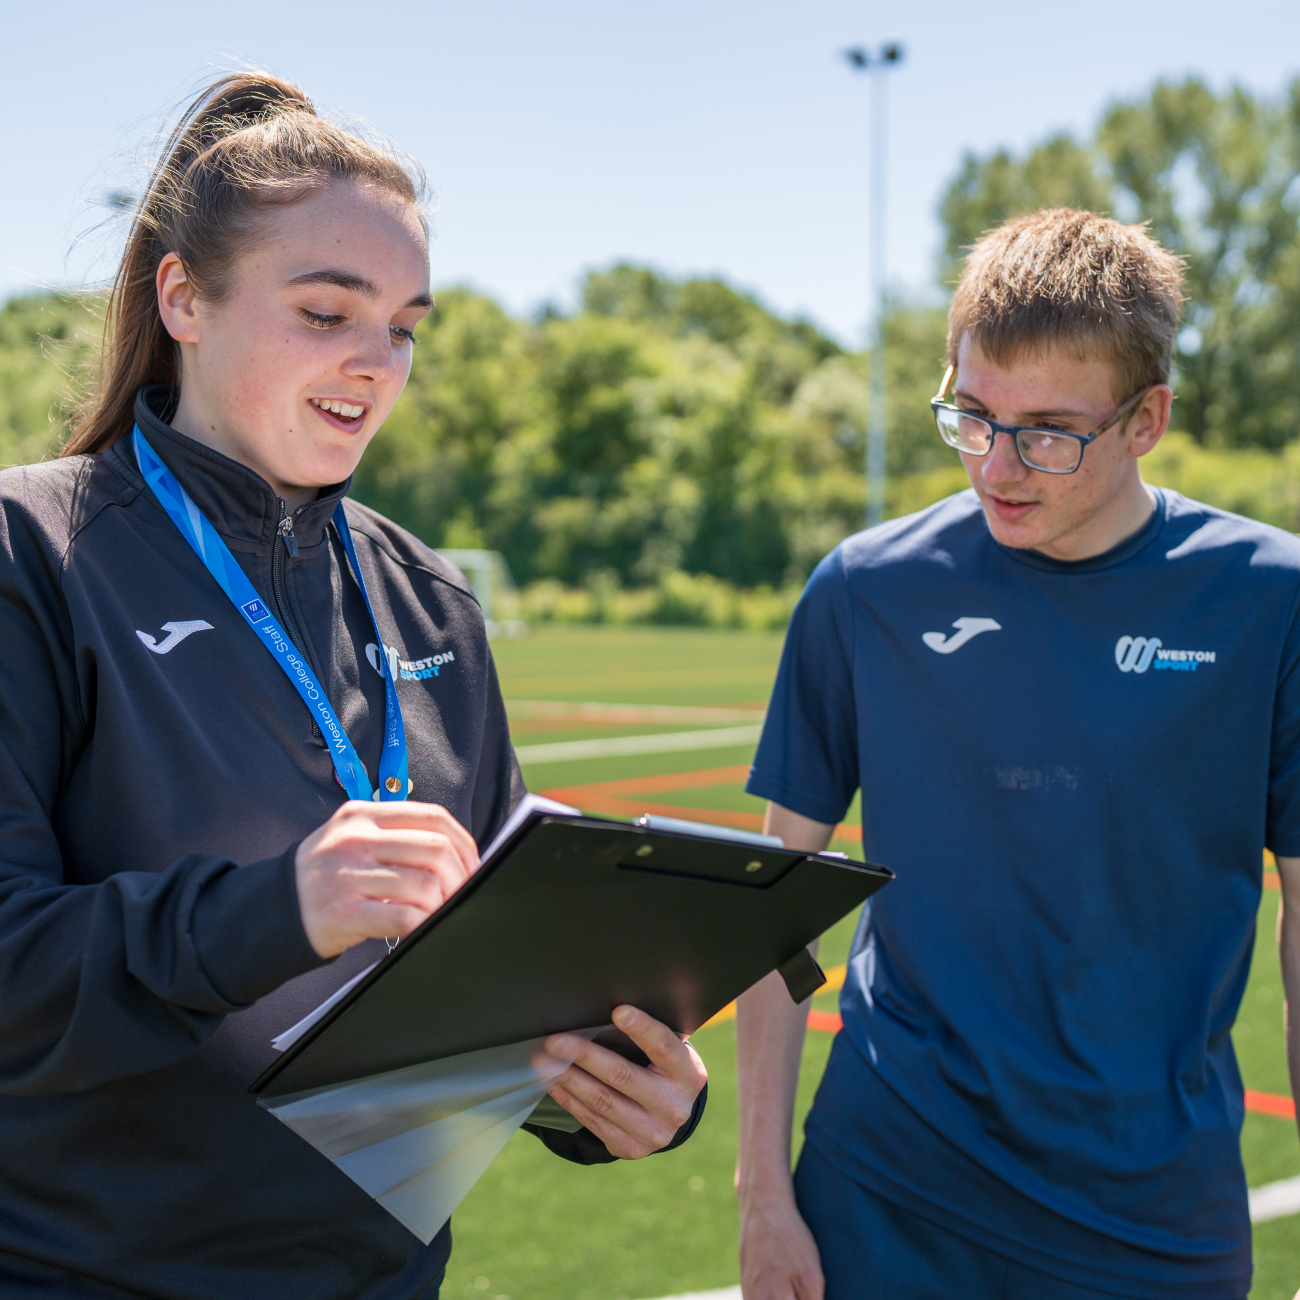 A Weston College sport lecturer on the sports field with a student both looking at a clipboard